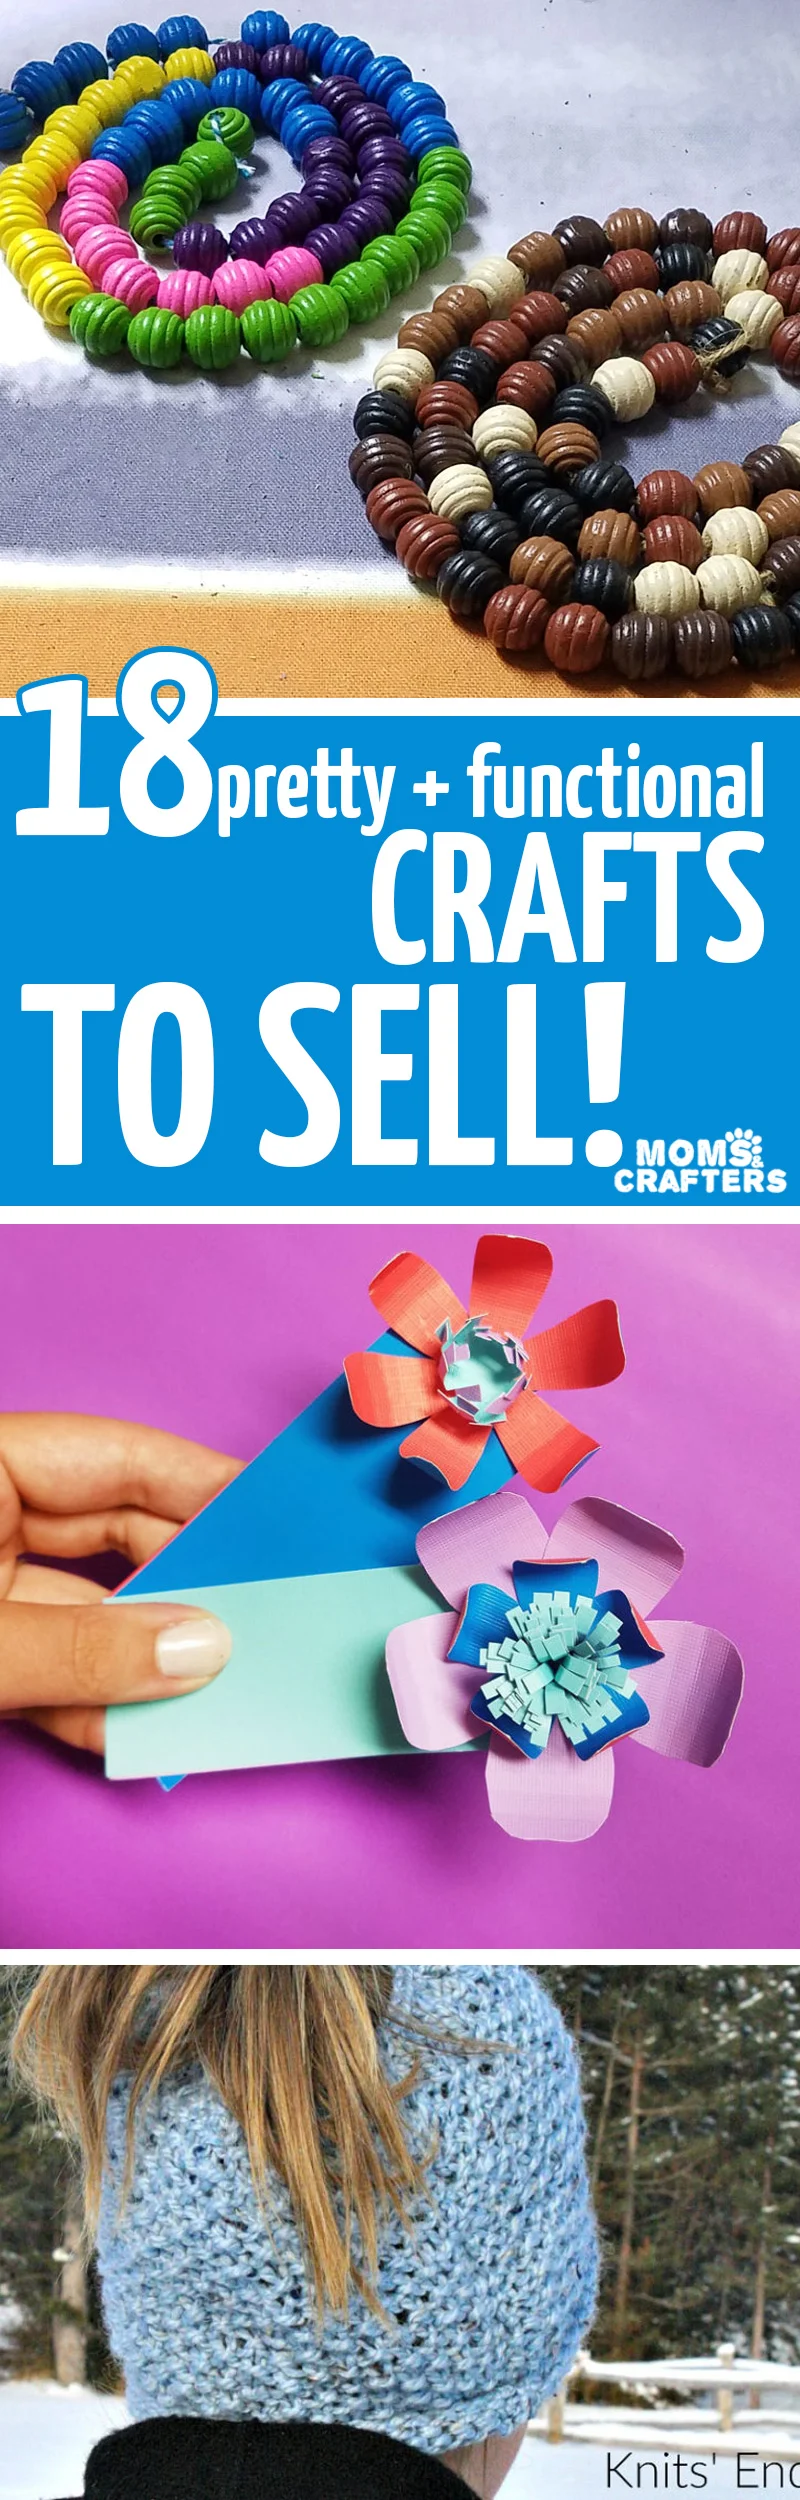 18 things to make and sell - these easy crafts for teens tweens and adults are perfect for craft fairs, charity sales, or for selling on Etsy! You'll love these free patterns and craft tutorials for all types of crafts to sell at home or online! #crafts #etsy #sellonetsy #craftfair #easycraft #